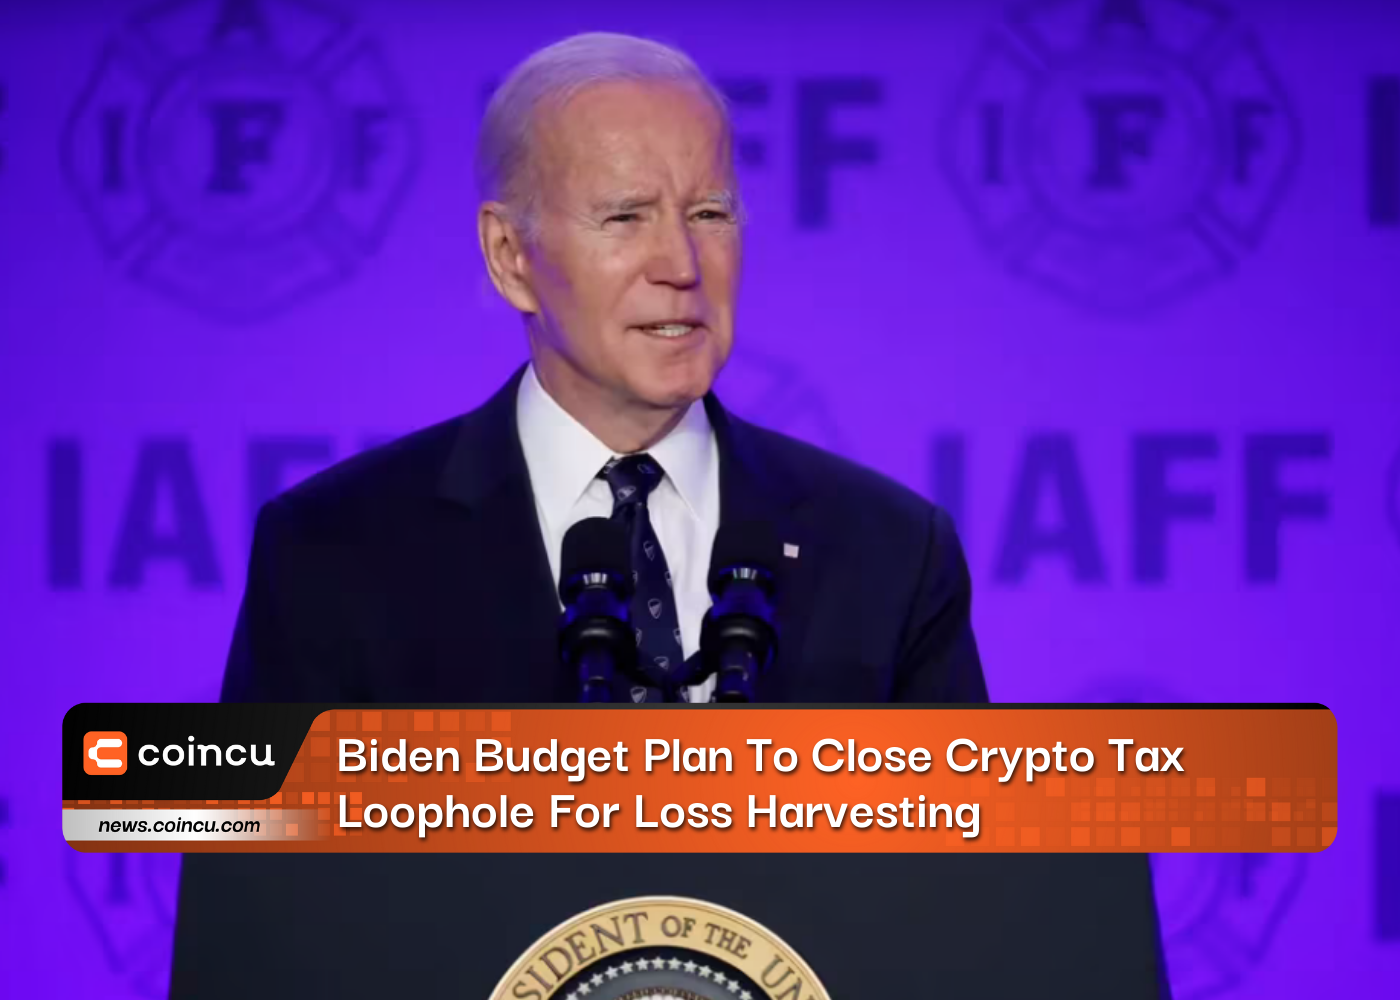 Biden Budget Plan To Close Crypto Tax Loophole For Loss Harvesting